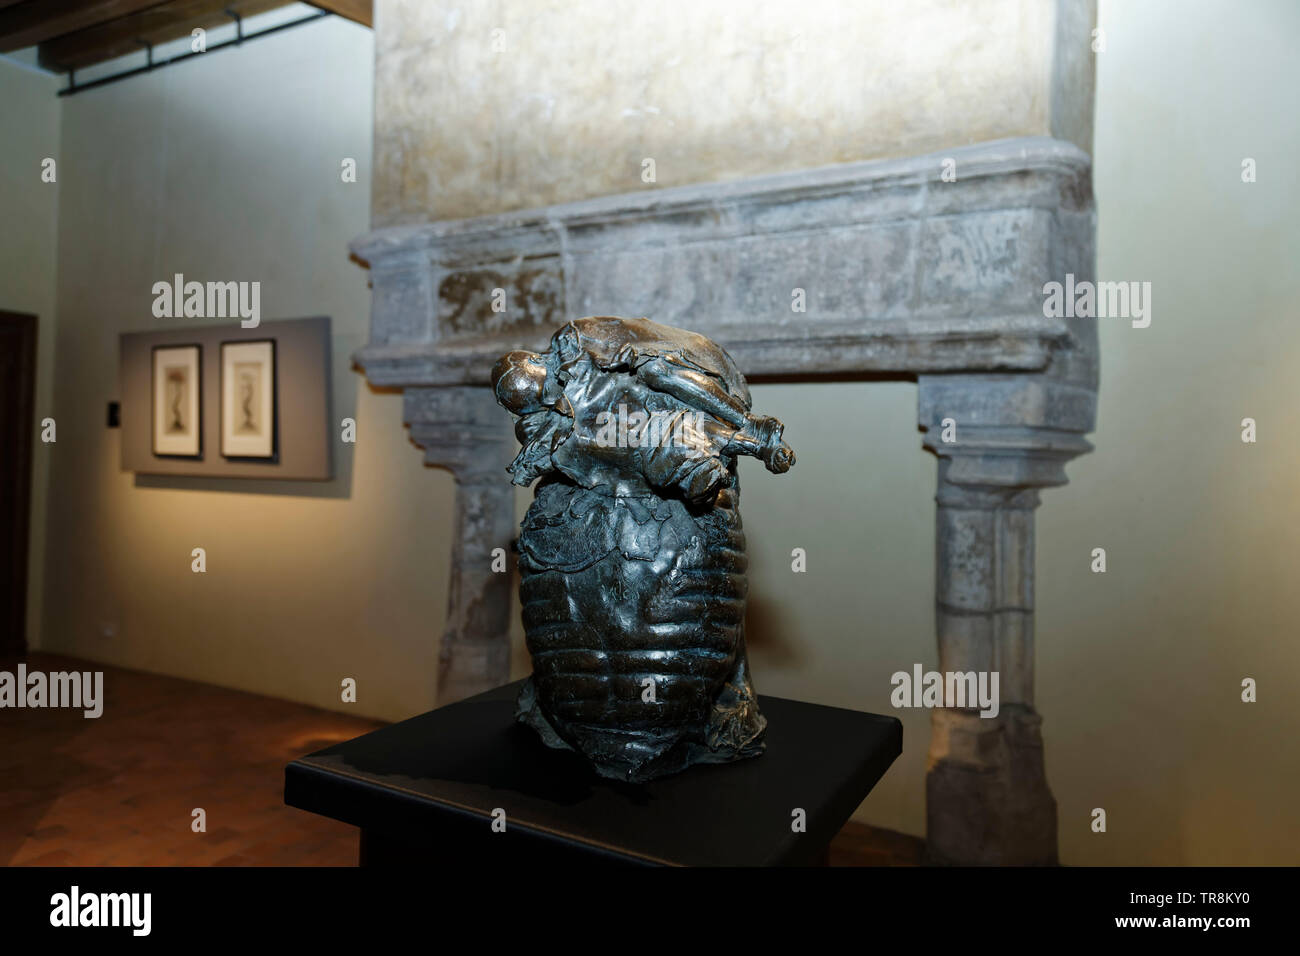 Tours, France.24th May,2019.Artworks of Georges Jenclos at Exhibition Re-naissance(s) of the Capazza Gallery:Veronique Phitoussi/Alamy Stock Photo Stock Photo